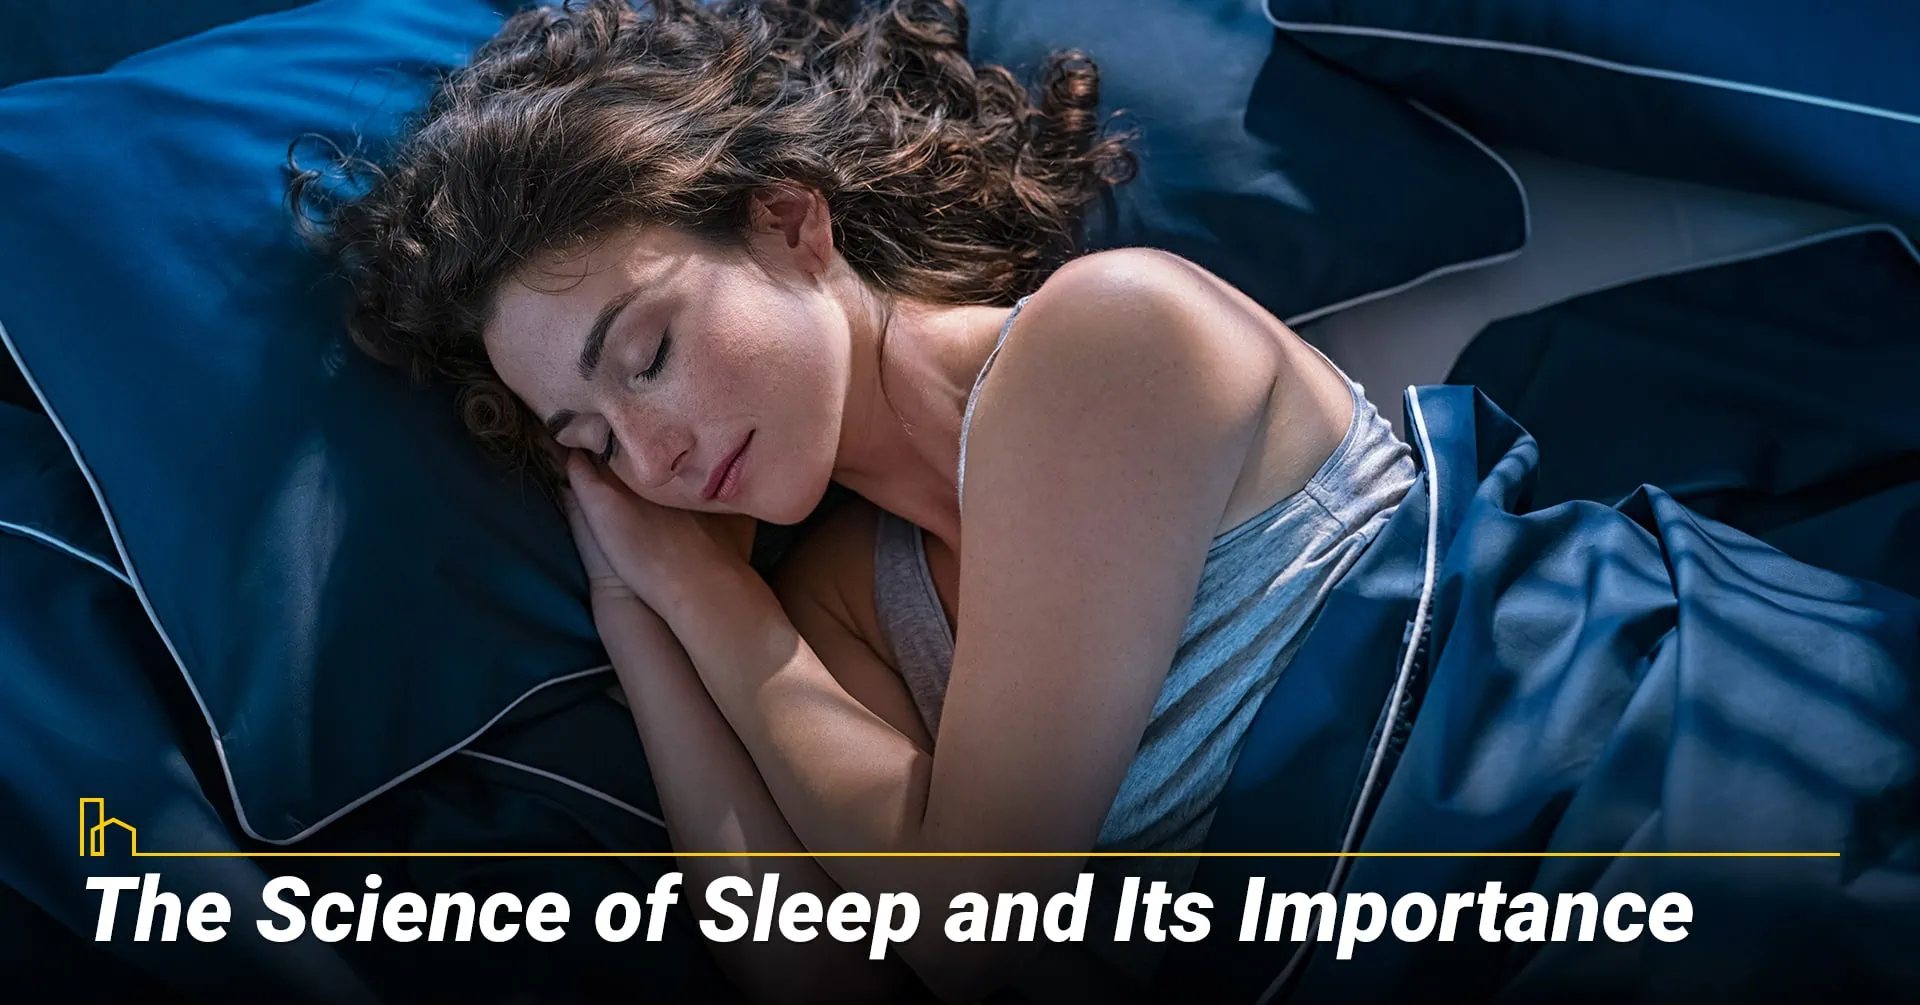 The Science of Sleep and Its Importance